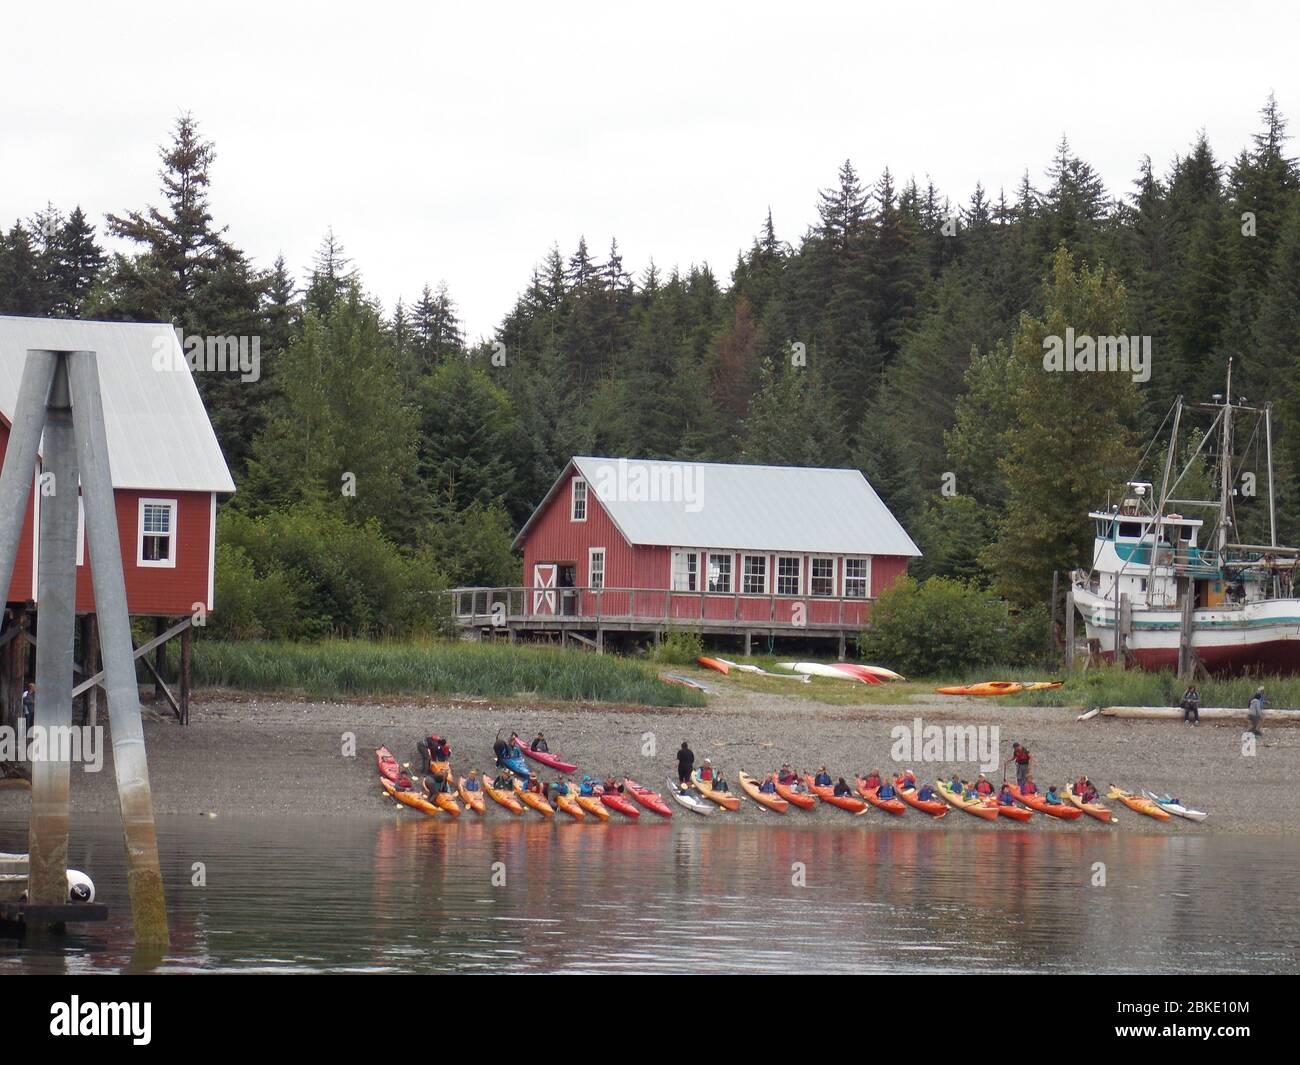 Kayaks lined up along the shore in Icy Strait Point (Hoonah), Alaska for cruise passengers on excursions. Stock Photo